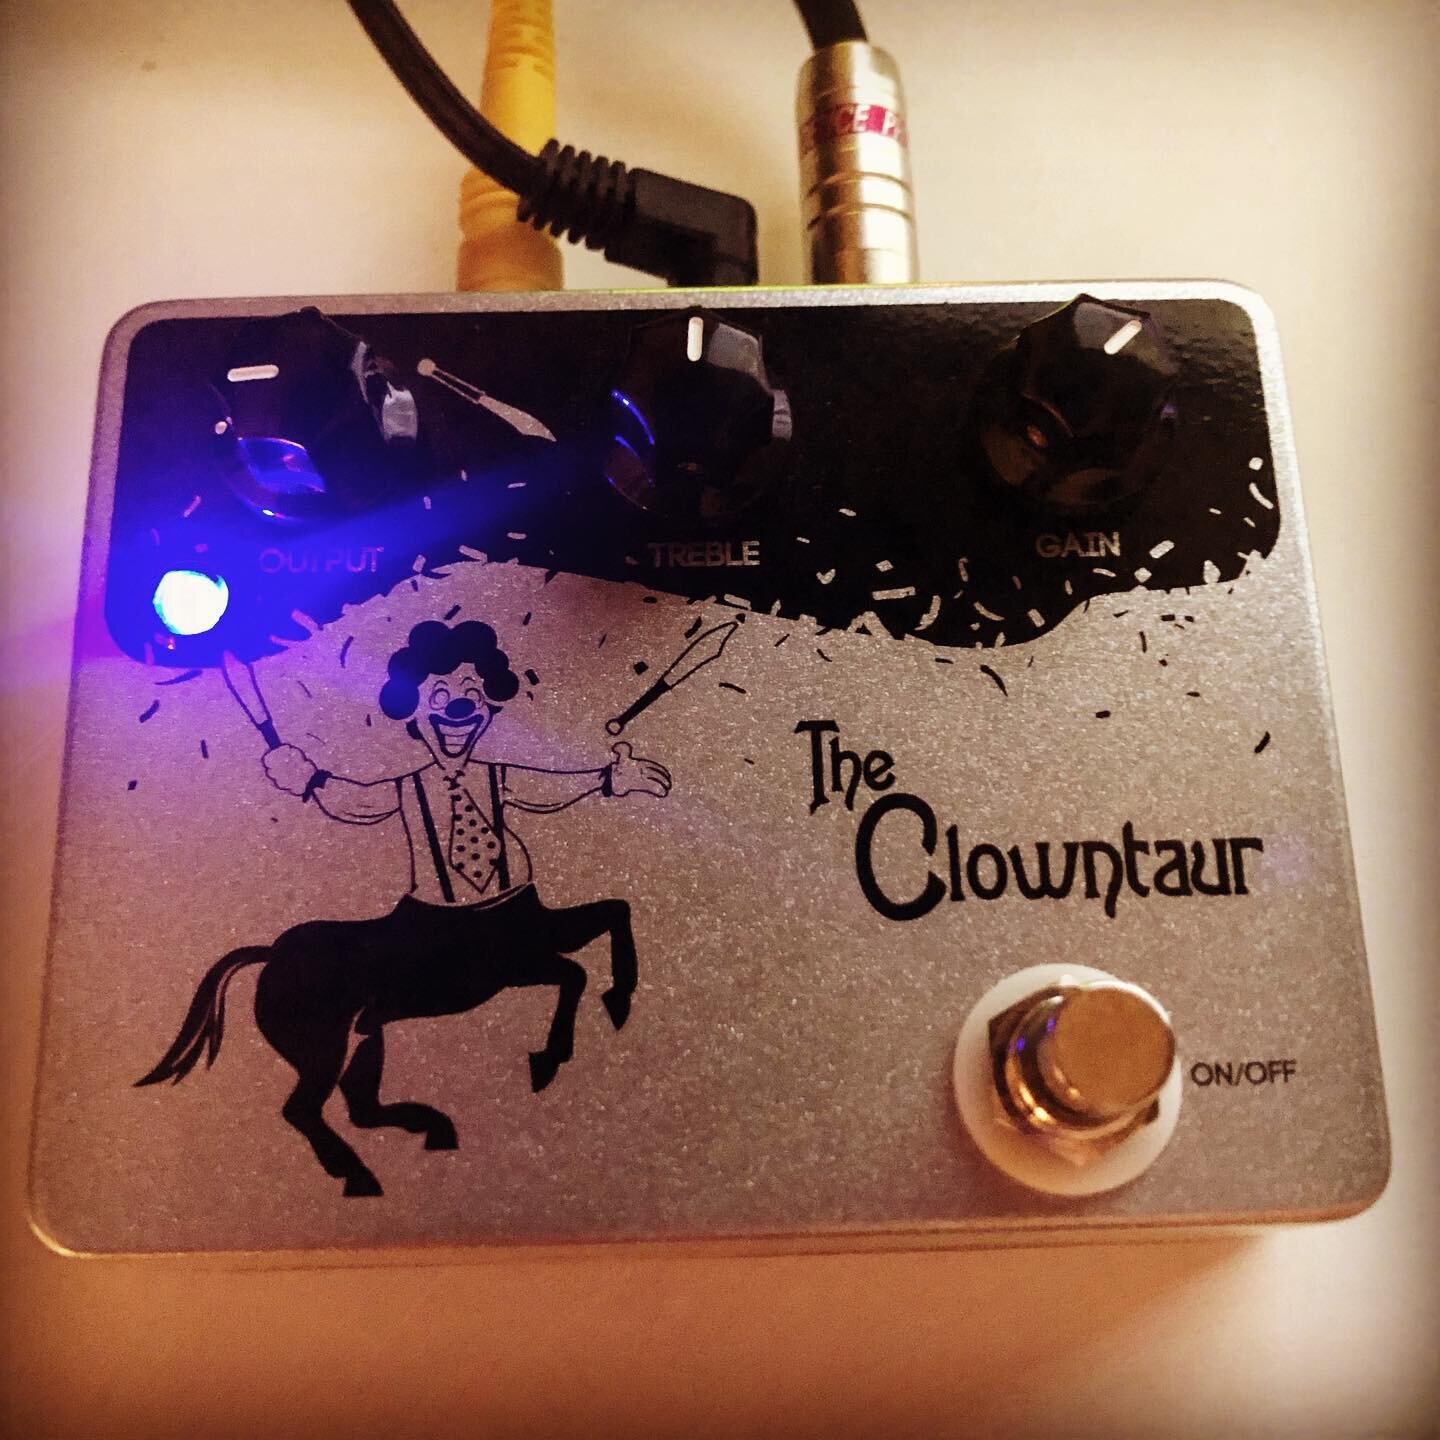 It&rsquo;s my girlfriend&rsquo;s birthday, so I bought myself a @jonnyrockgear Clowntaur, a take on a highly coveted &amp; overpriced pedal featuring a similar beastie on the it. Stoked! Happy birthday, babe!
.
.
.
.
.
.
.
.
.
.
.
#JonnyRockGear #gui